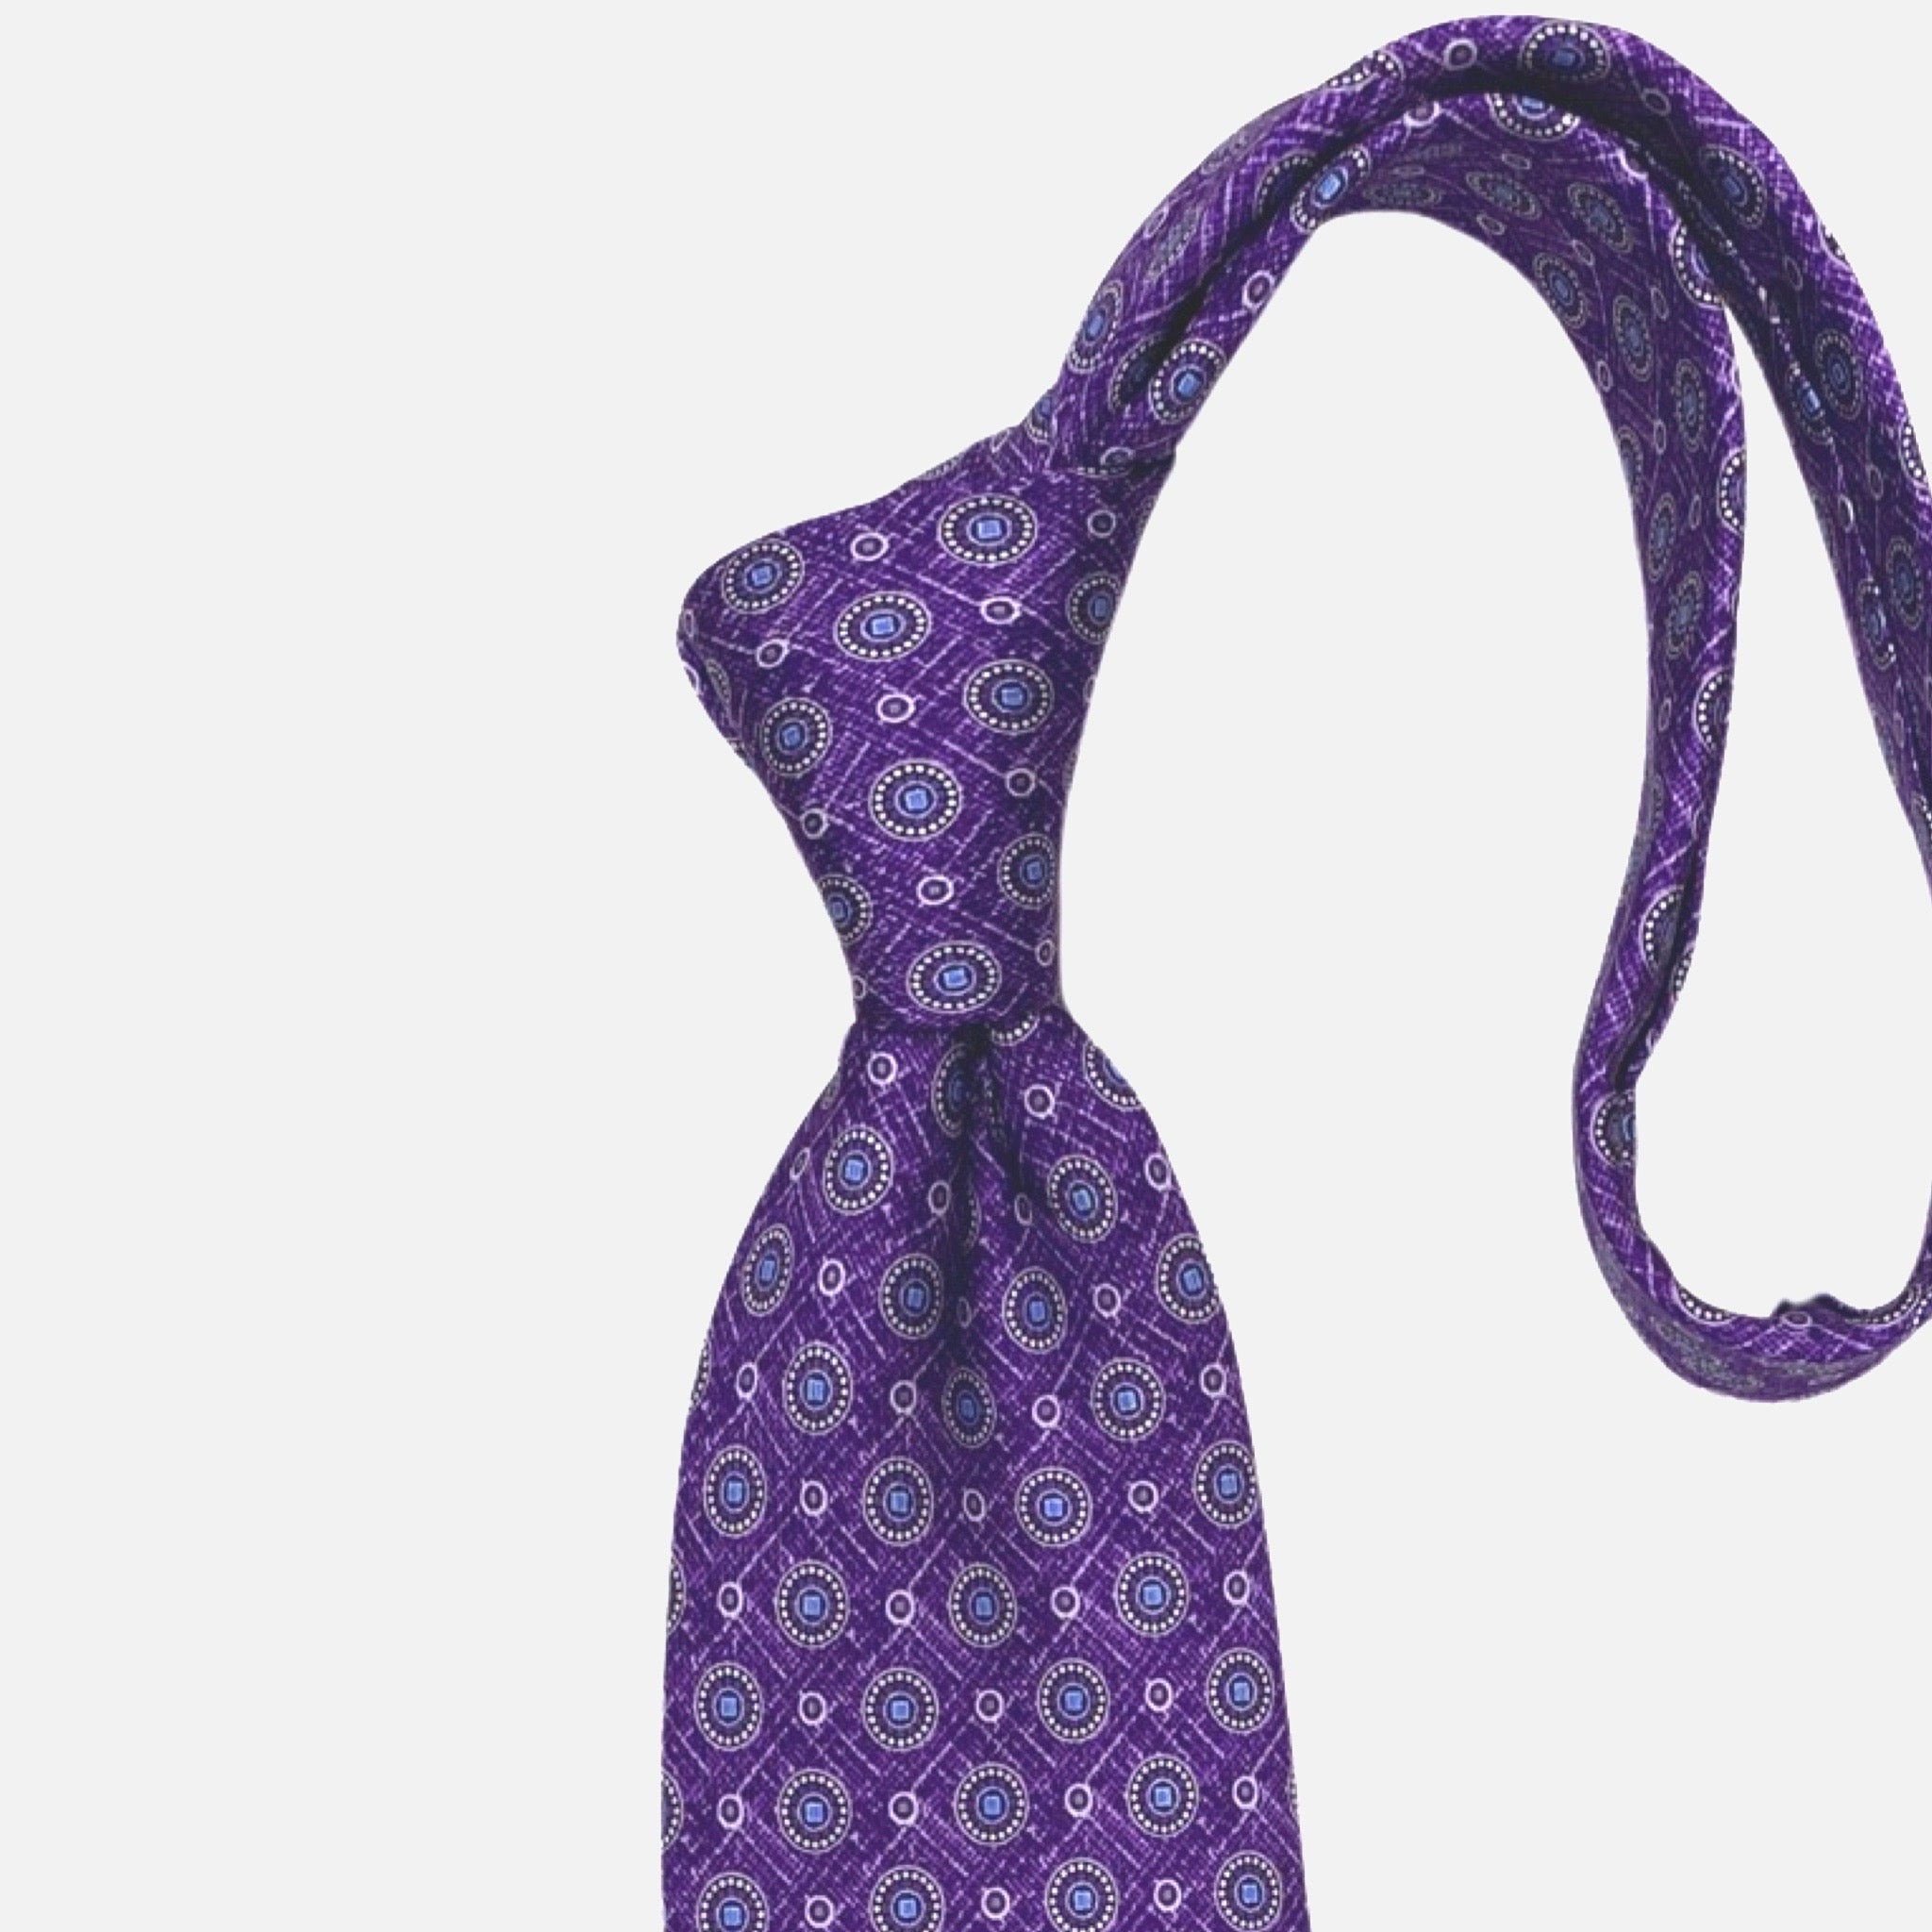 JZ Richards Purple Silk Tie - Elegance Enhanced with Blue and Silver Accents - Handmade in the USA